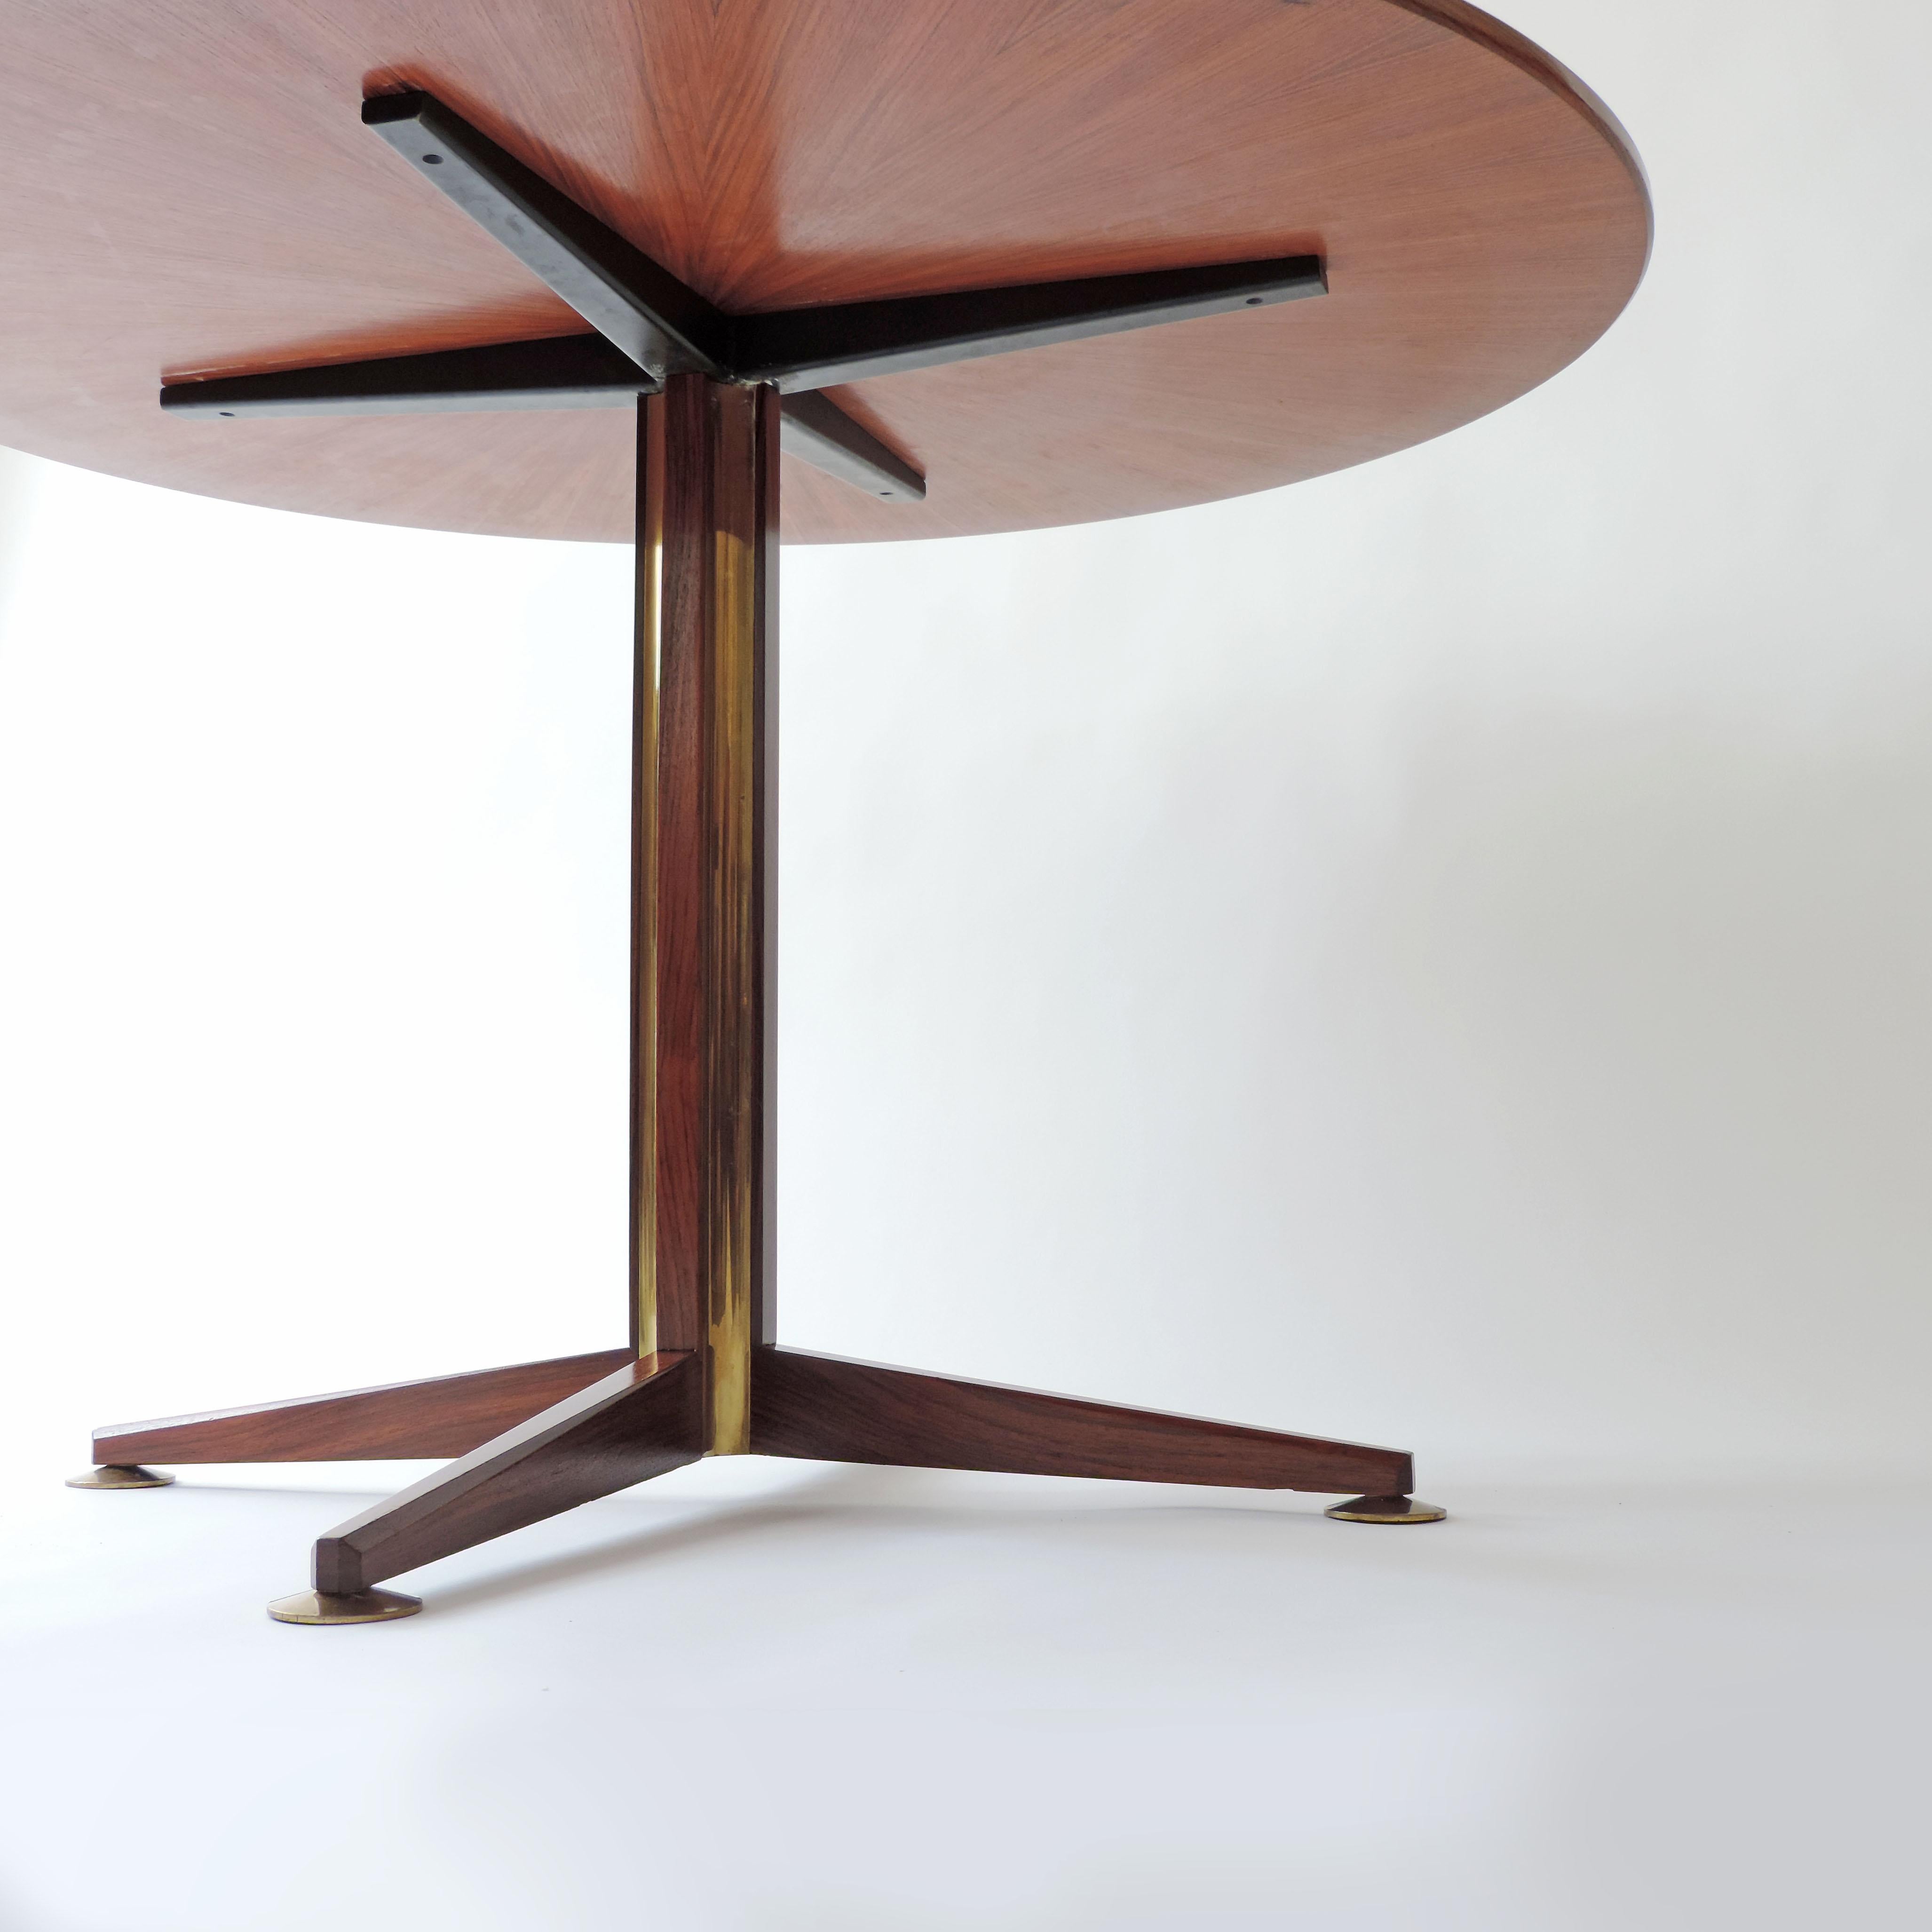 Osvaldo Borsani circular dining table in 
sculpted wood and brass details, Italy, 1960s